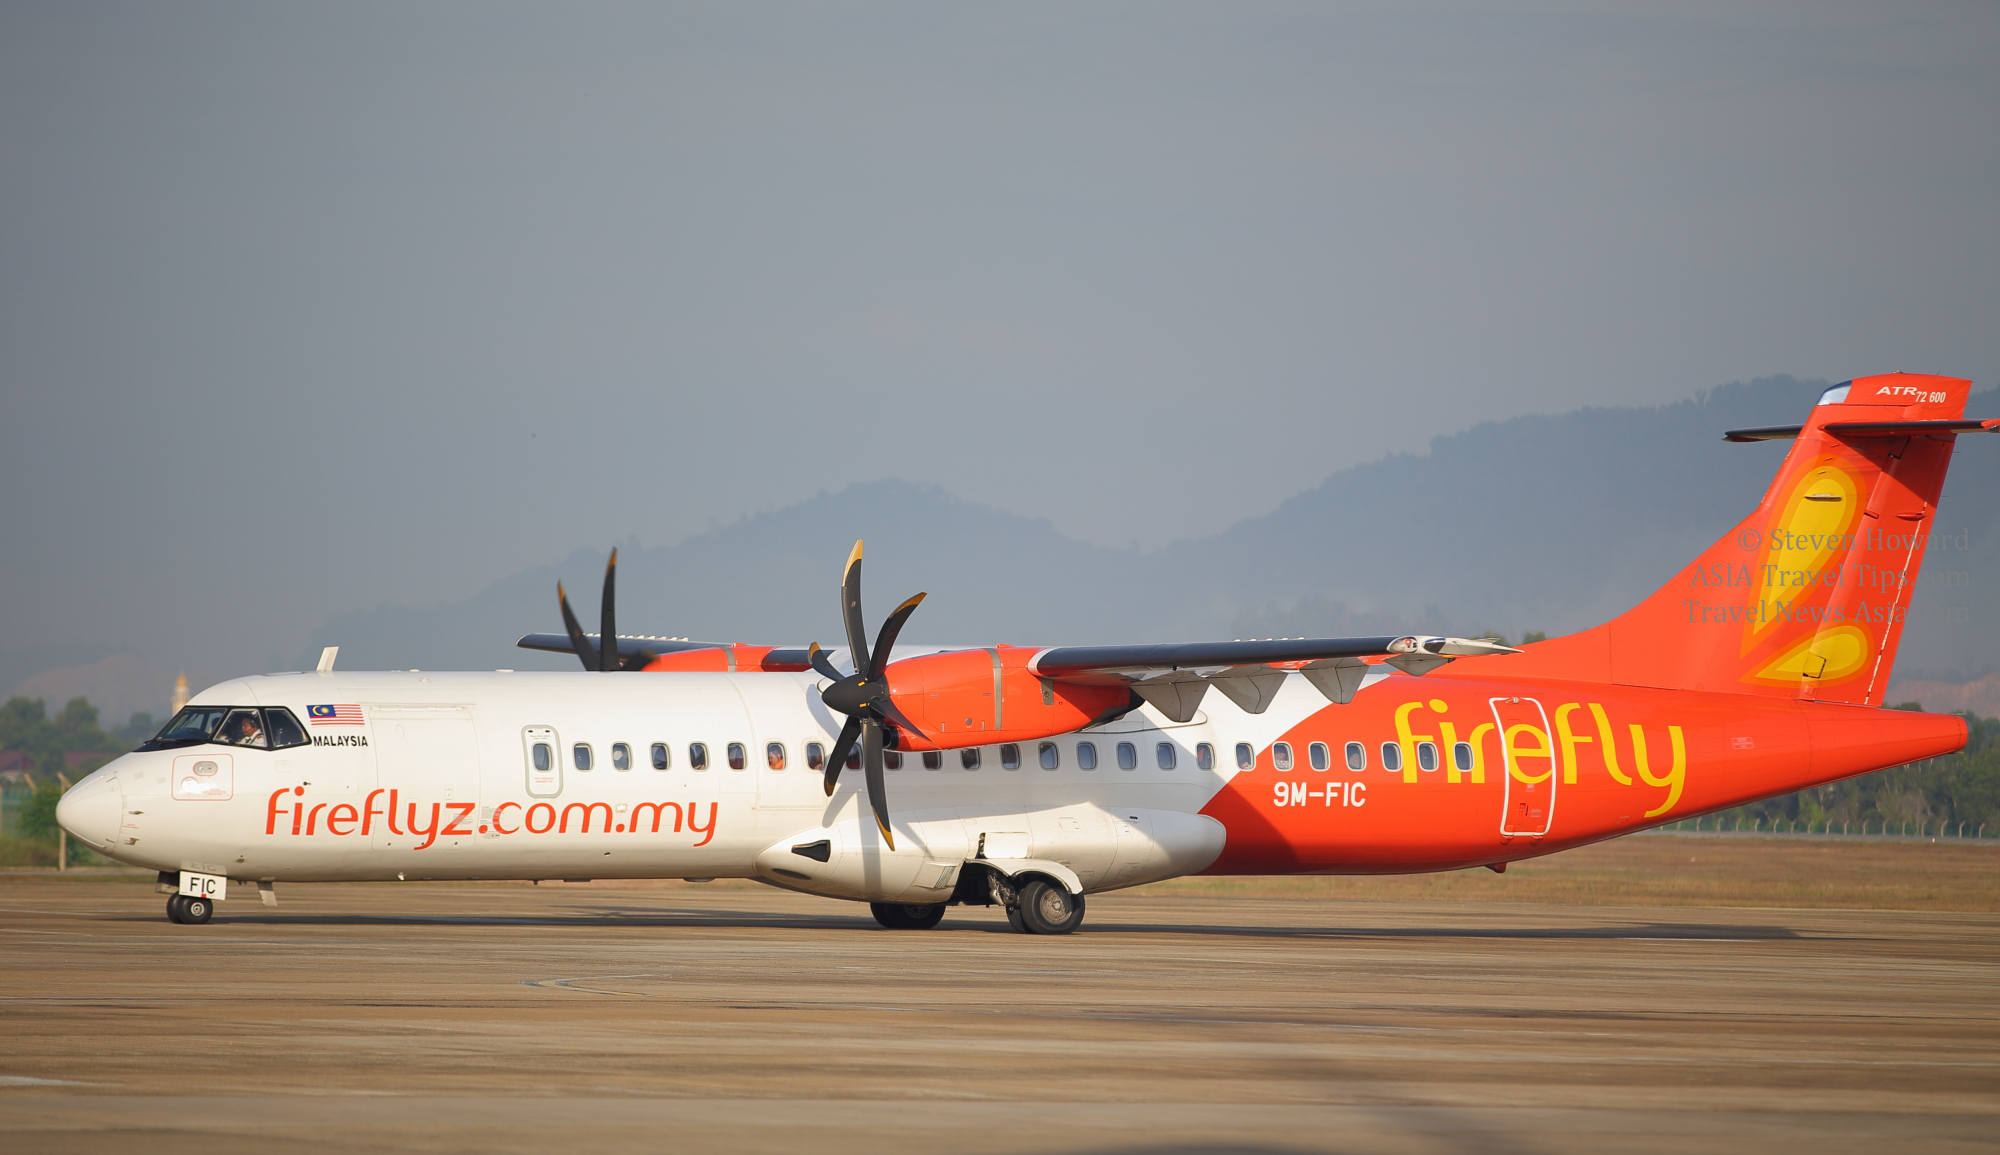 Firefly ATR 72-600 reg: 9M-FIC. Picture by Steven Howard of TravelNewsAsia.com Click to enlarge.